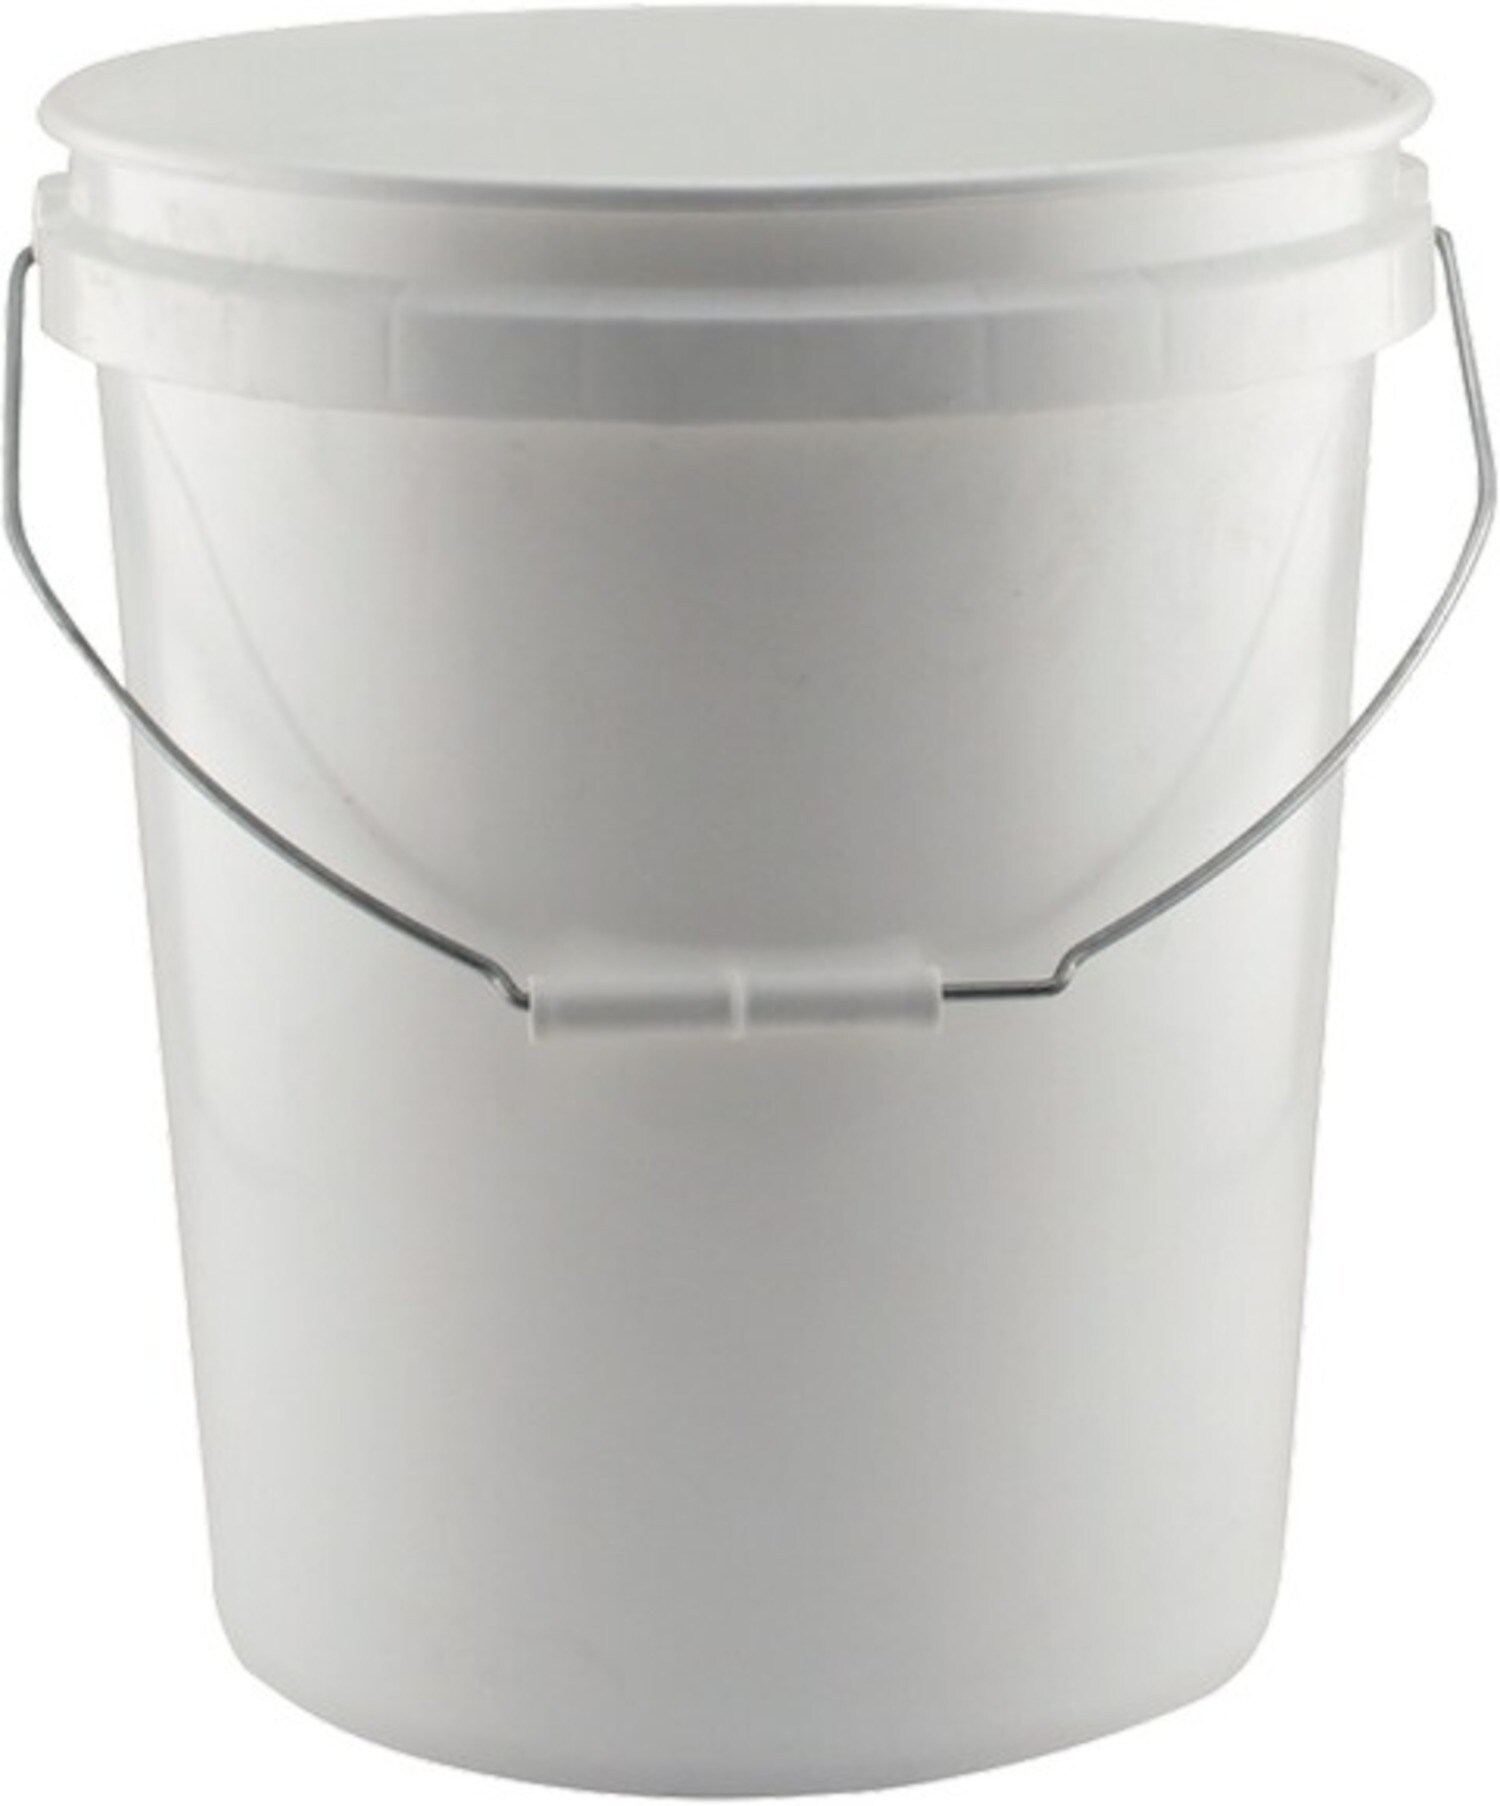 Lowe's 5-Quart Recycled Material General Bucket in the Buckets